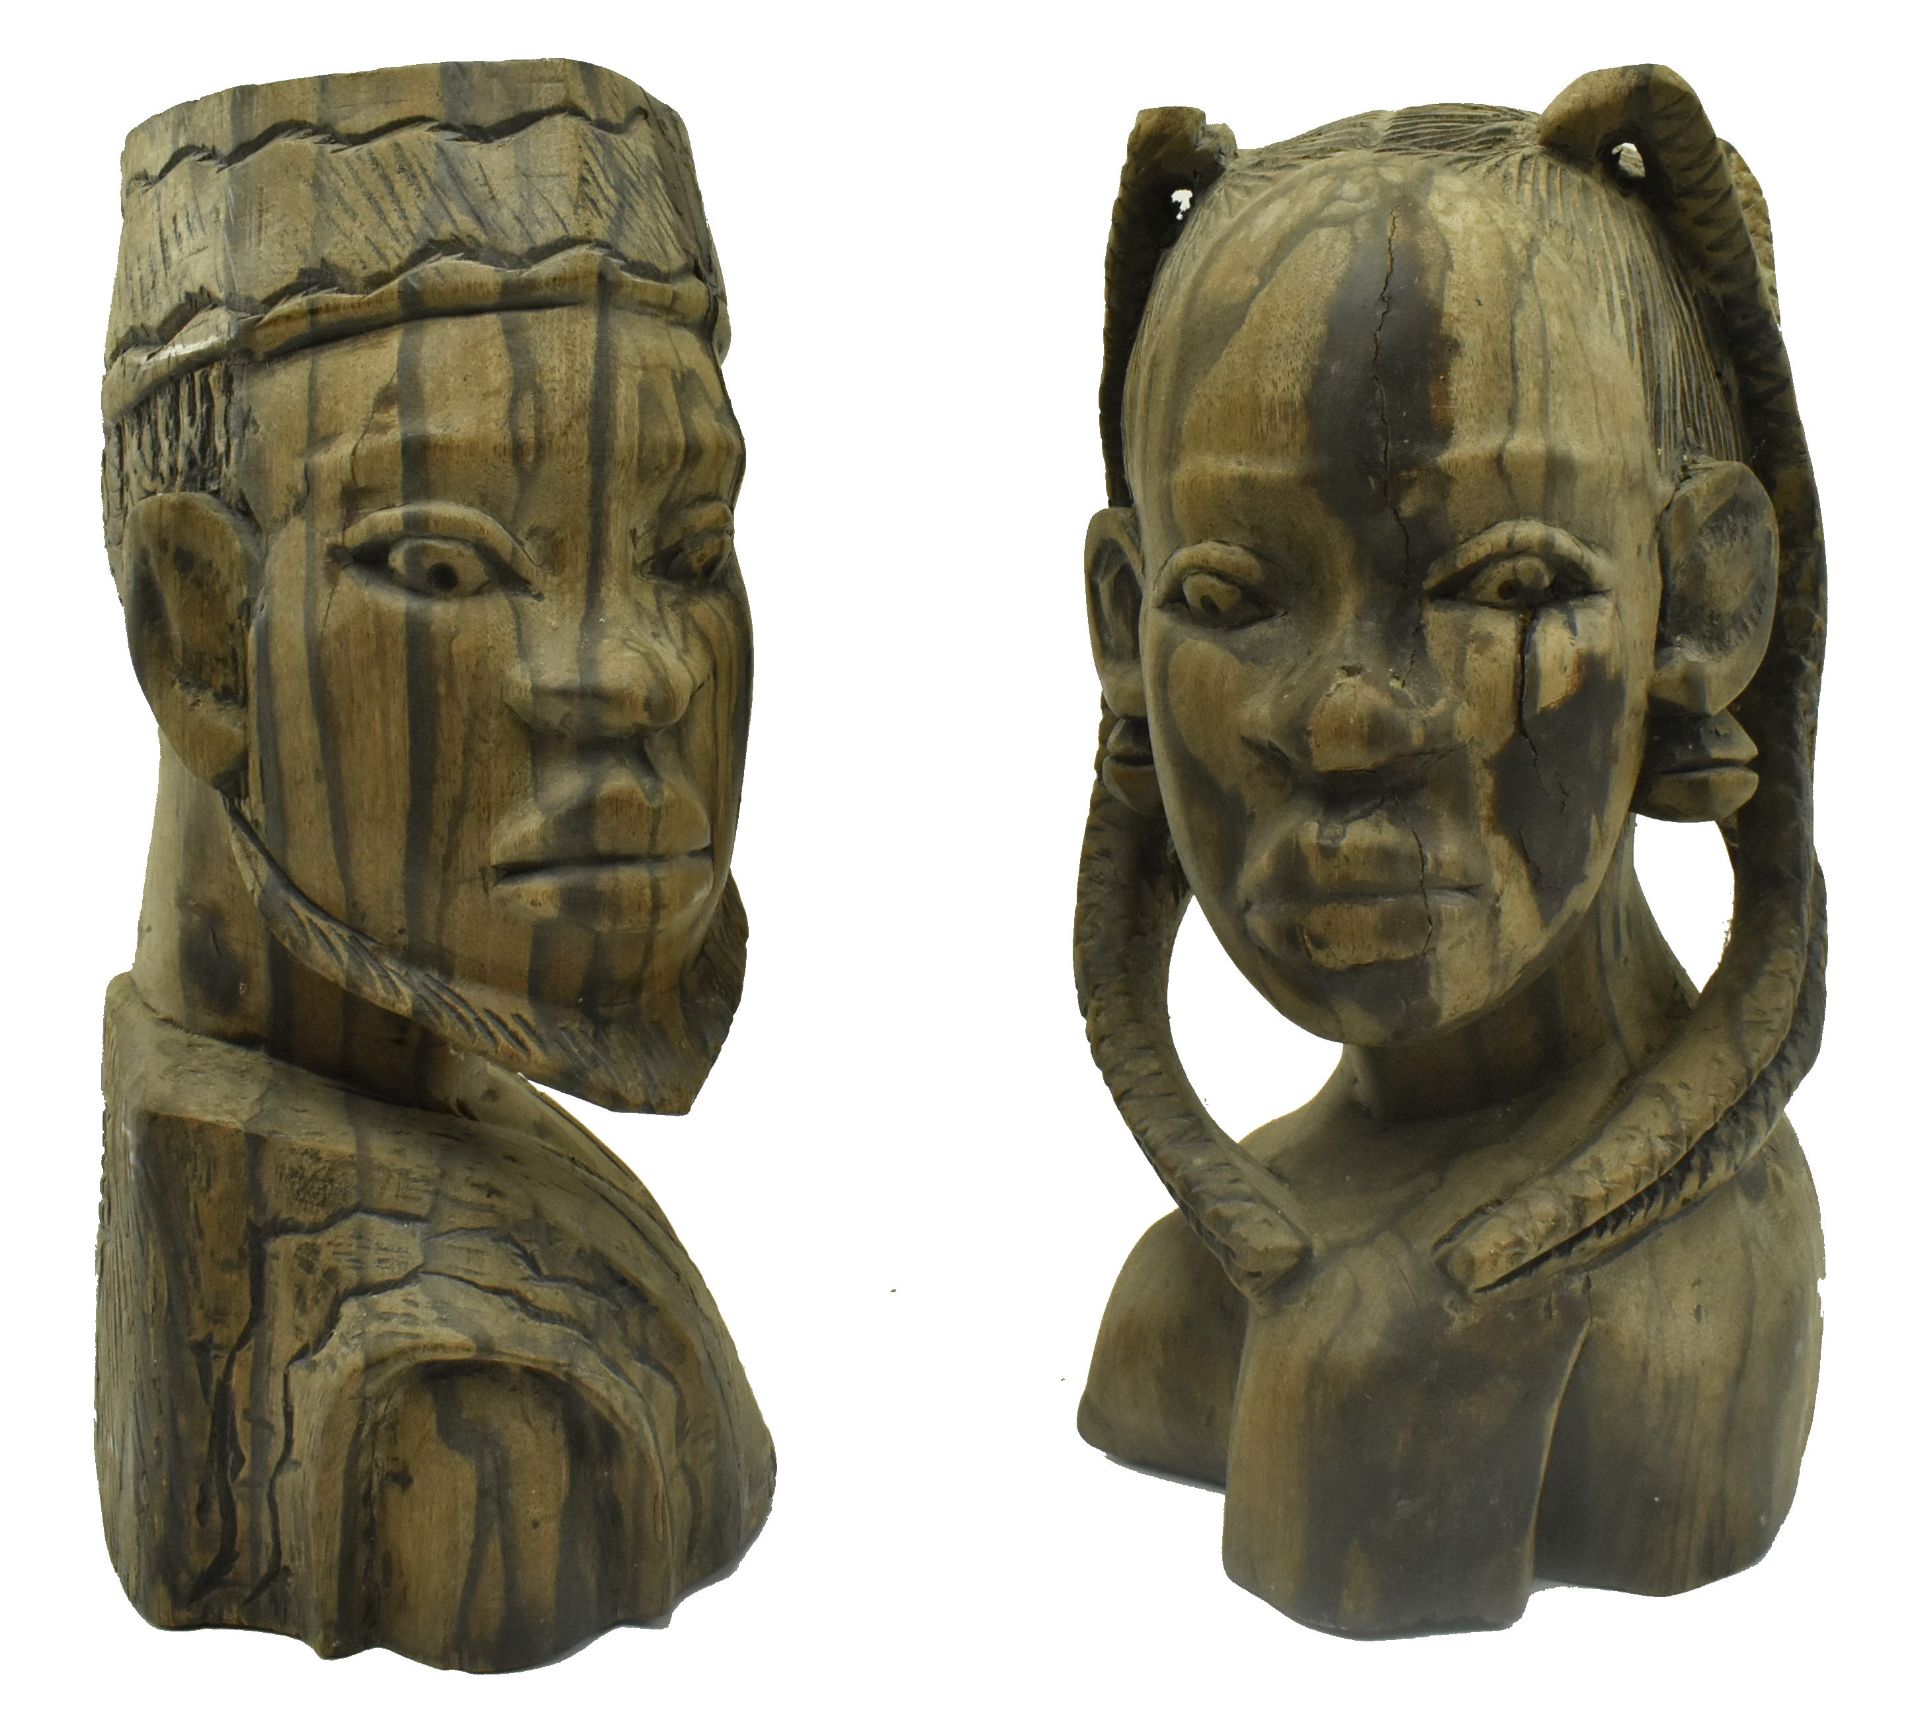 PAIR OF AFRICAN BENIN LATE 19TH CENTURY CARVED WOOD BUSTS